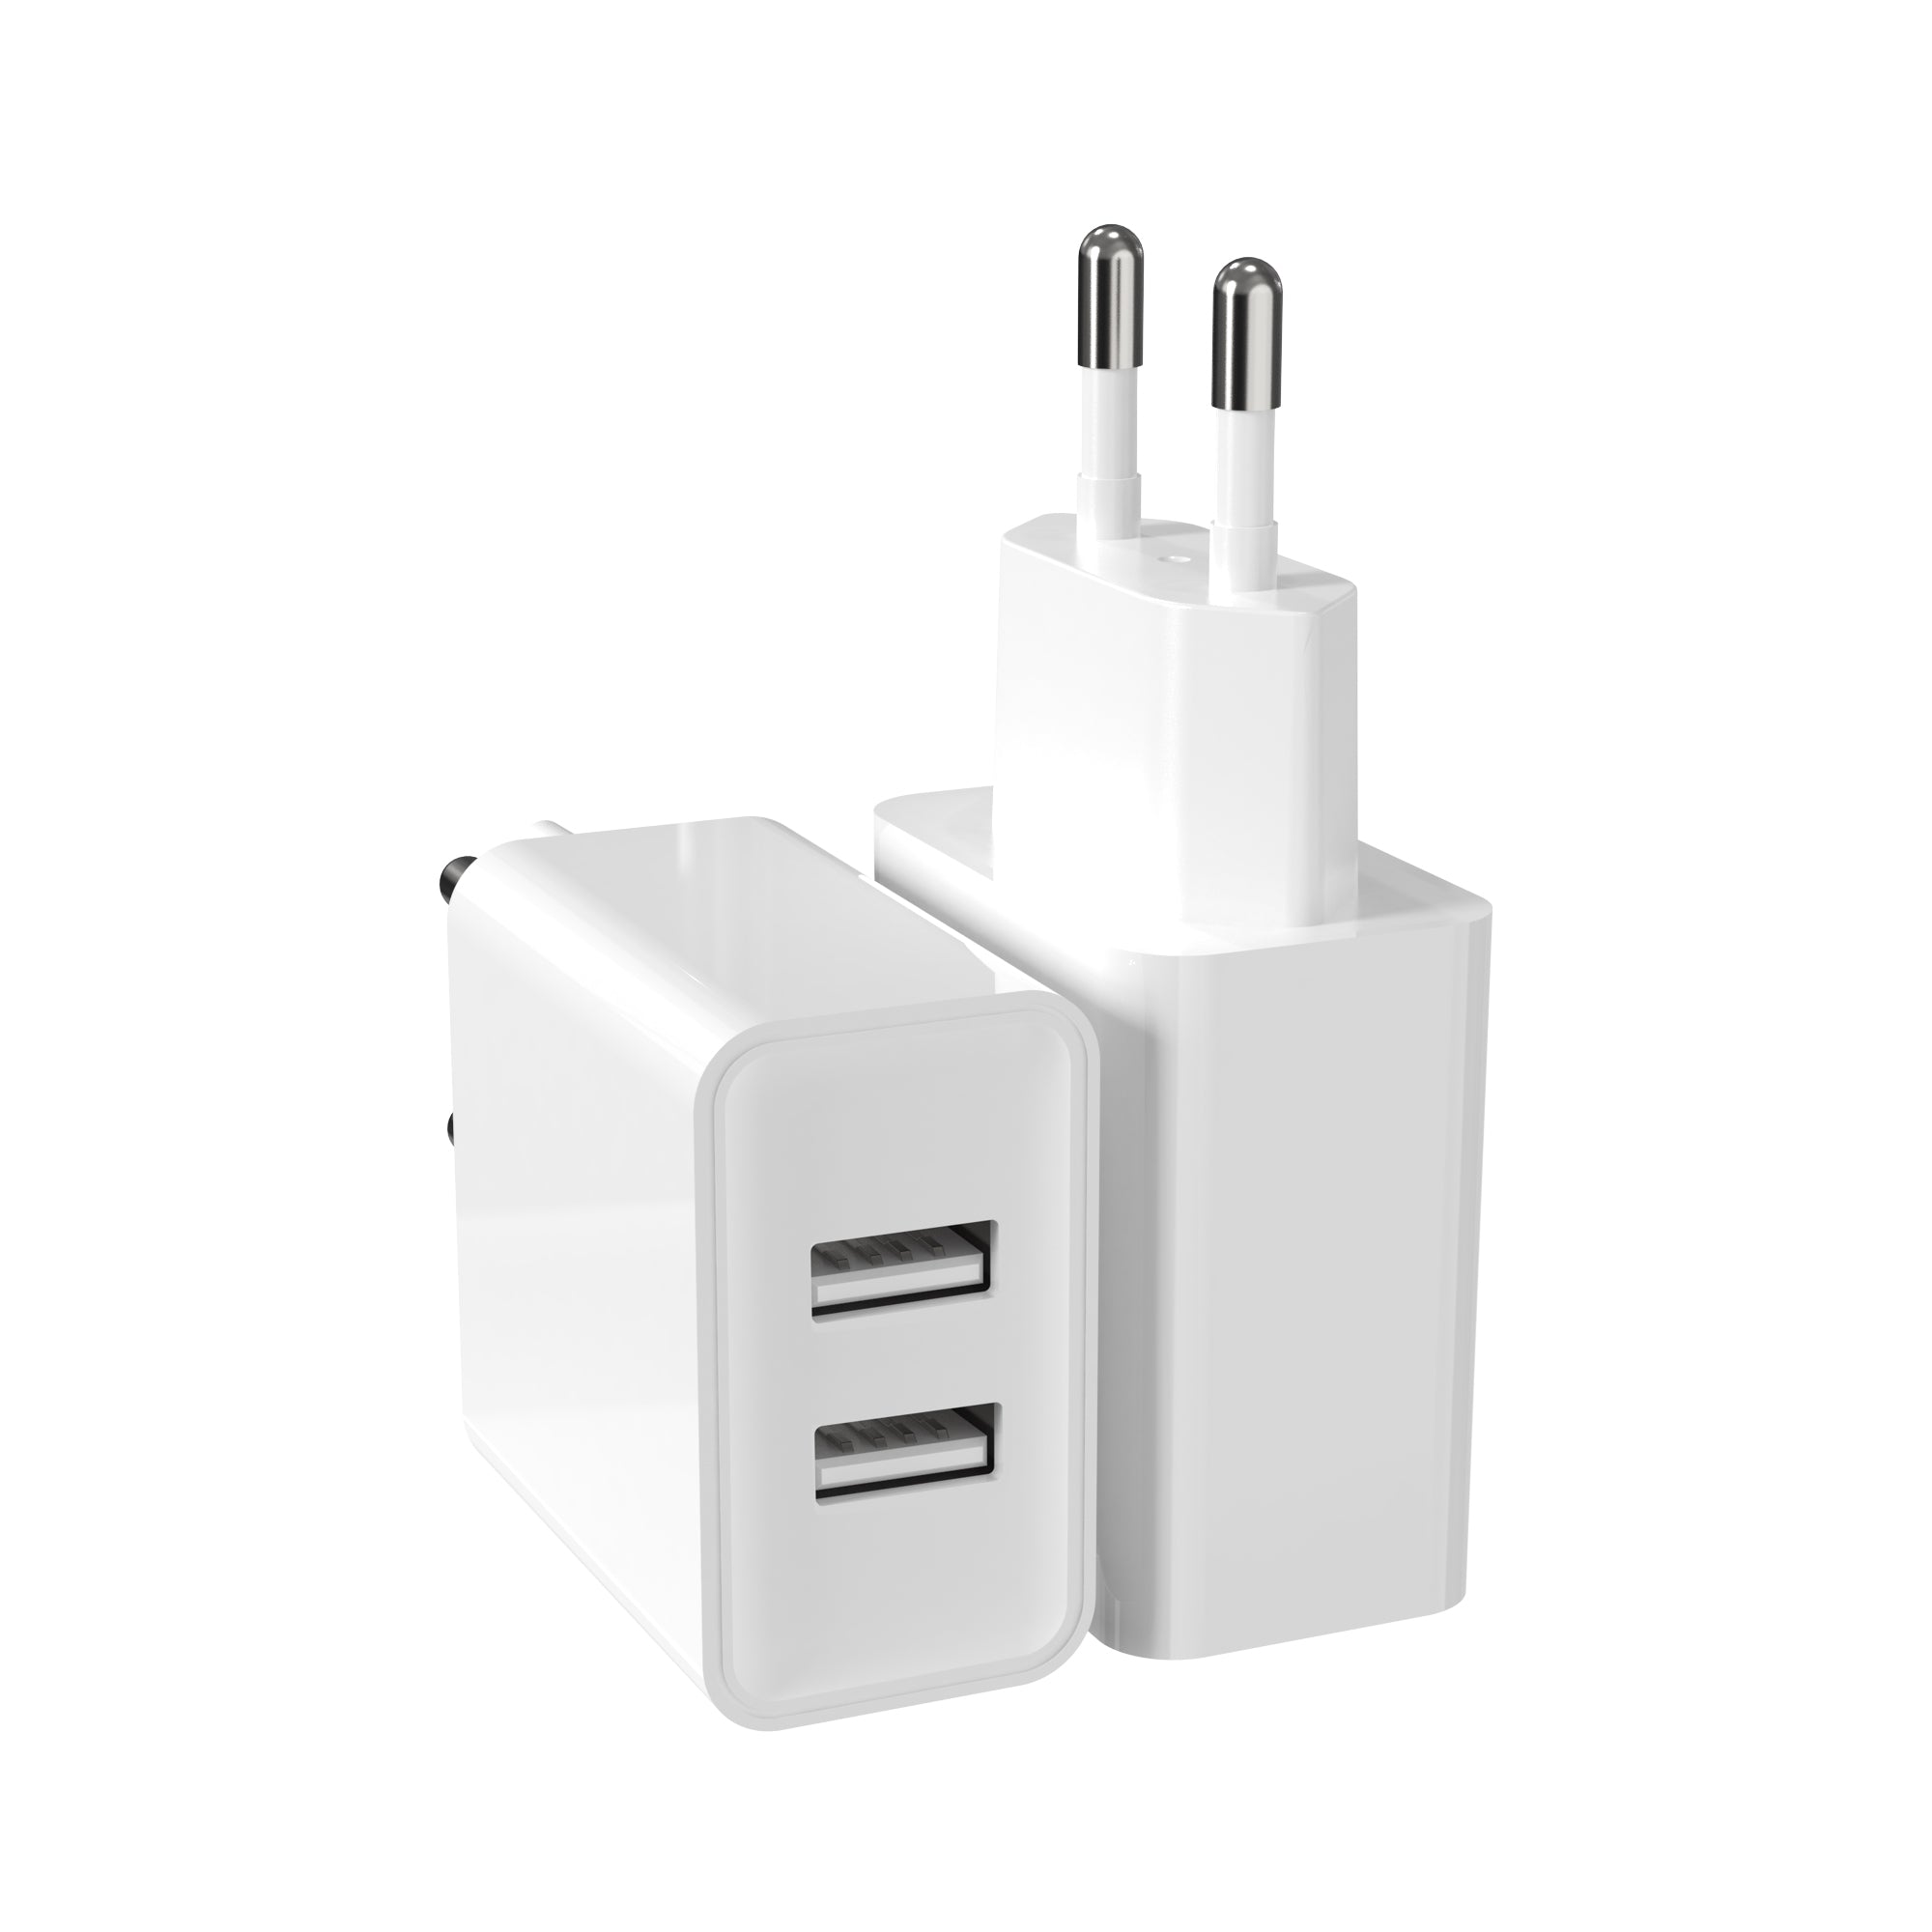 MINISO 10.5W DUAL PORT USB CHARGER  MODEL: ST600 (WHITE) 2013232810109 CHARGER